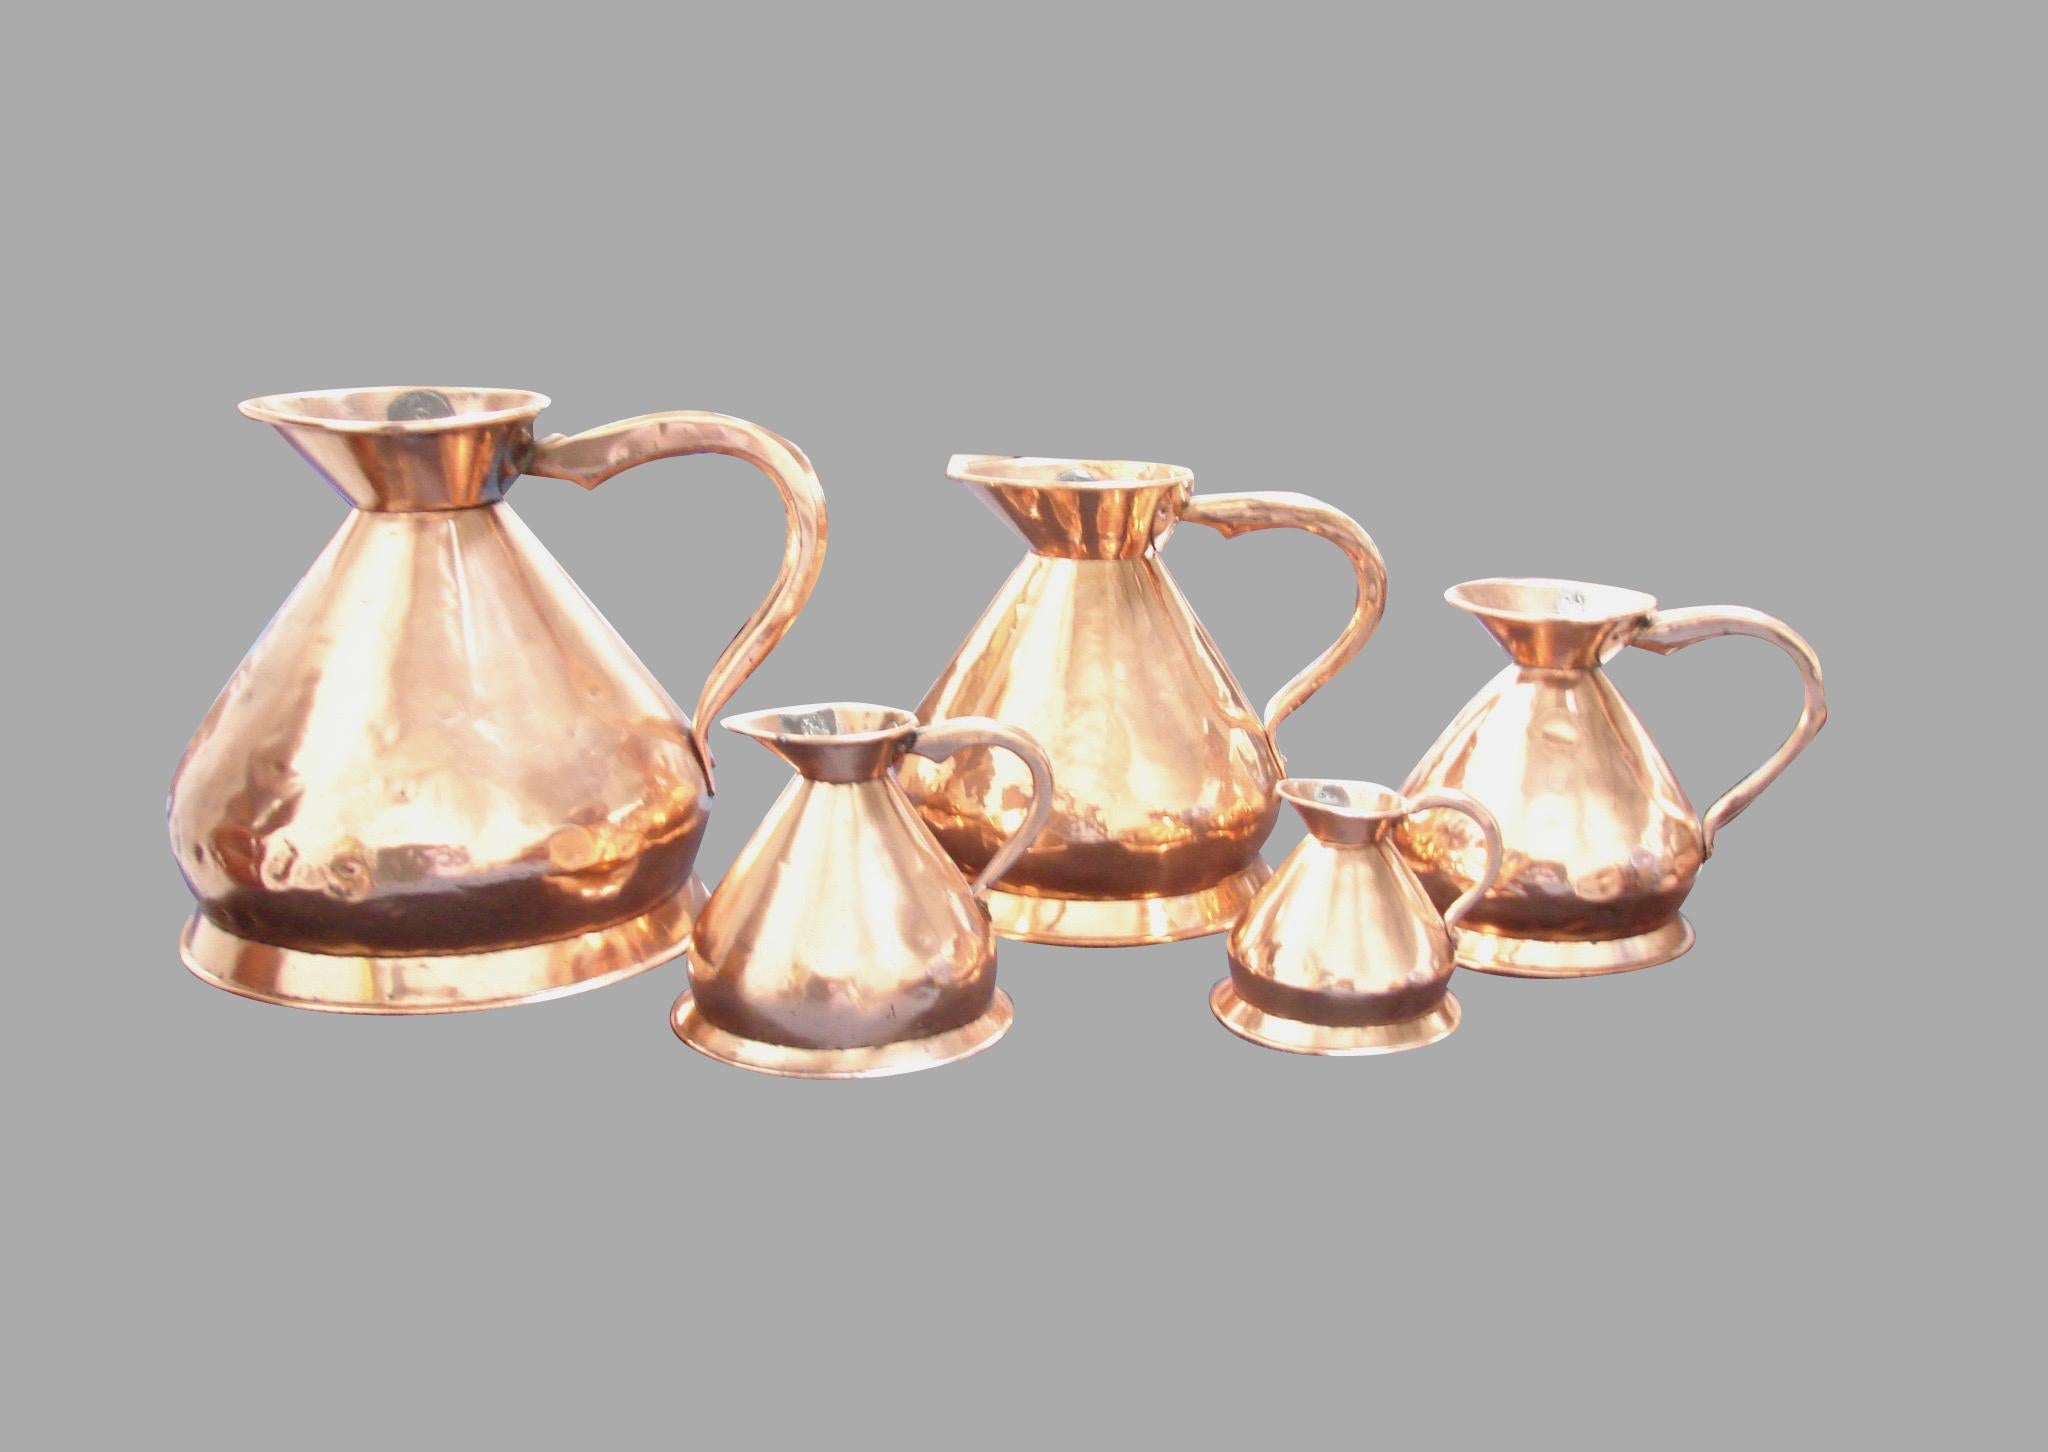 Set of 5 English Copper Graduated Haystack Measures 4 Gallons to 1 Quart 4